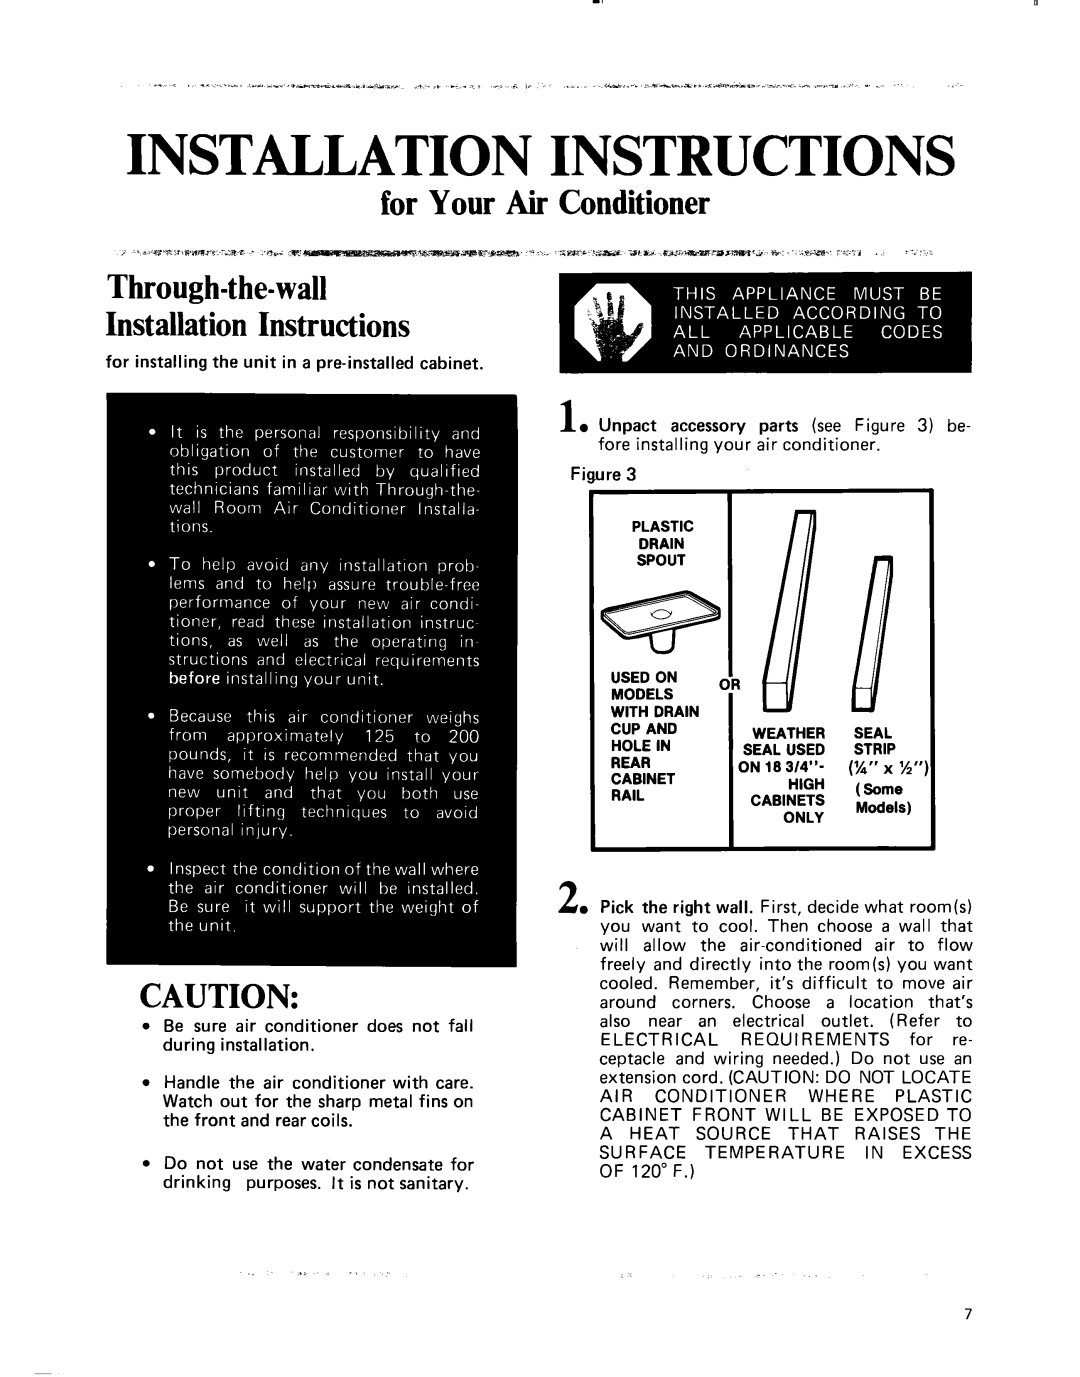 Whirlpool ACE184XM0 manual for Your Air Conditioner Through-the-wall, Installation Instructions 